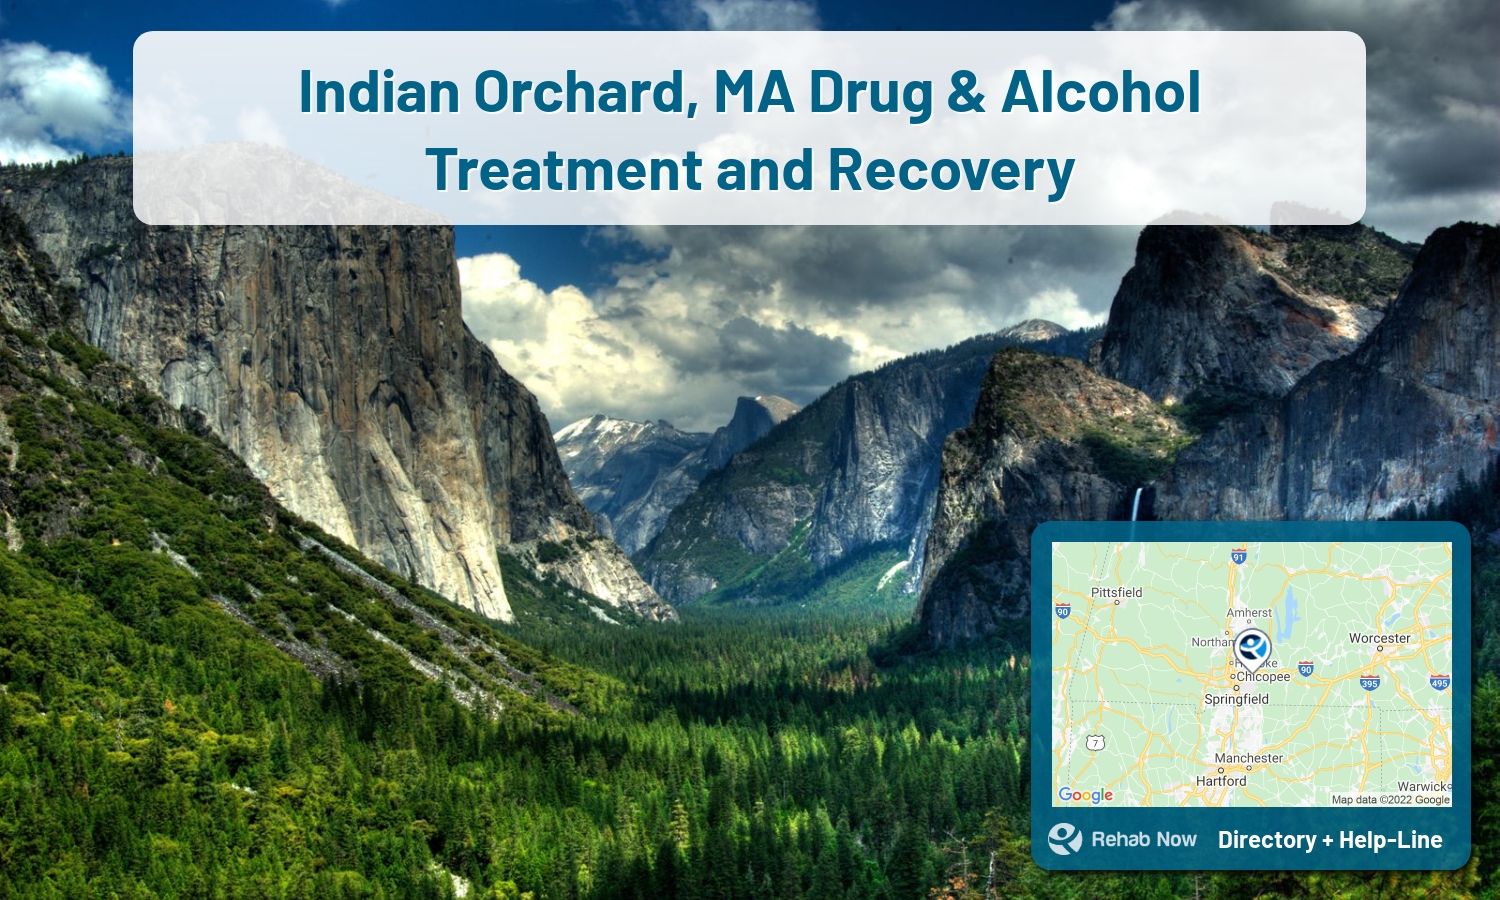 Indian Orchard, MA Treatment Centers. Find drug rehab in Indian Orchard, Massachusetts, or detox and treatment programs. Get the right help now!